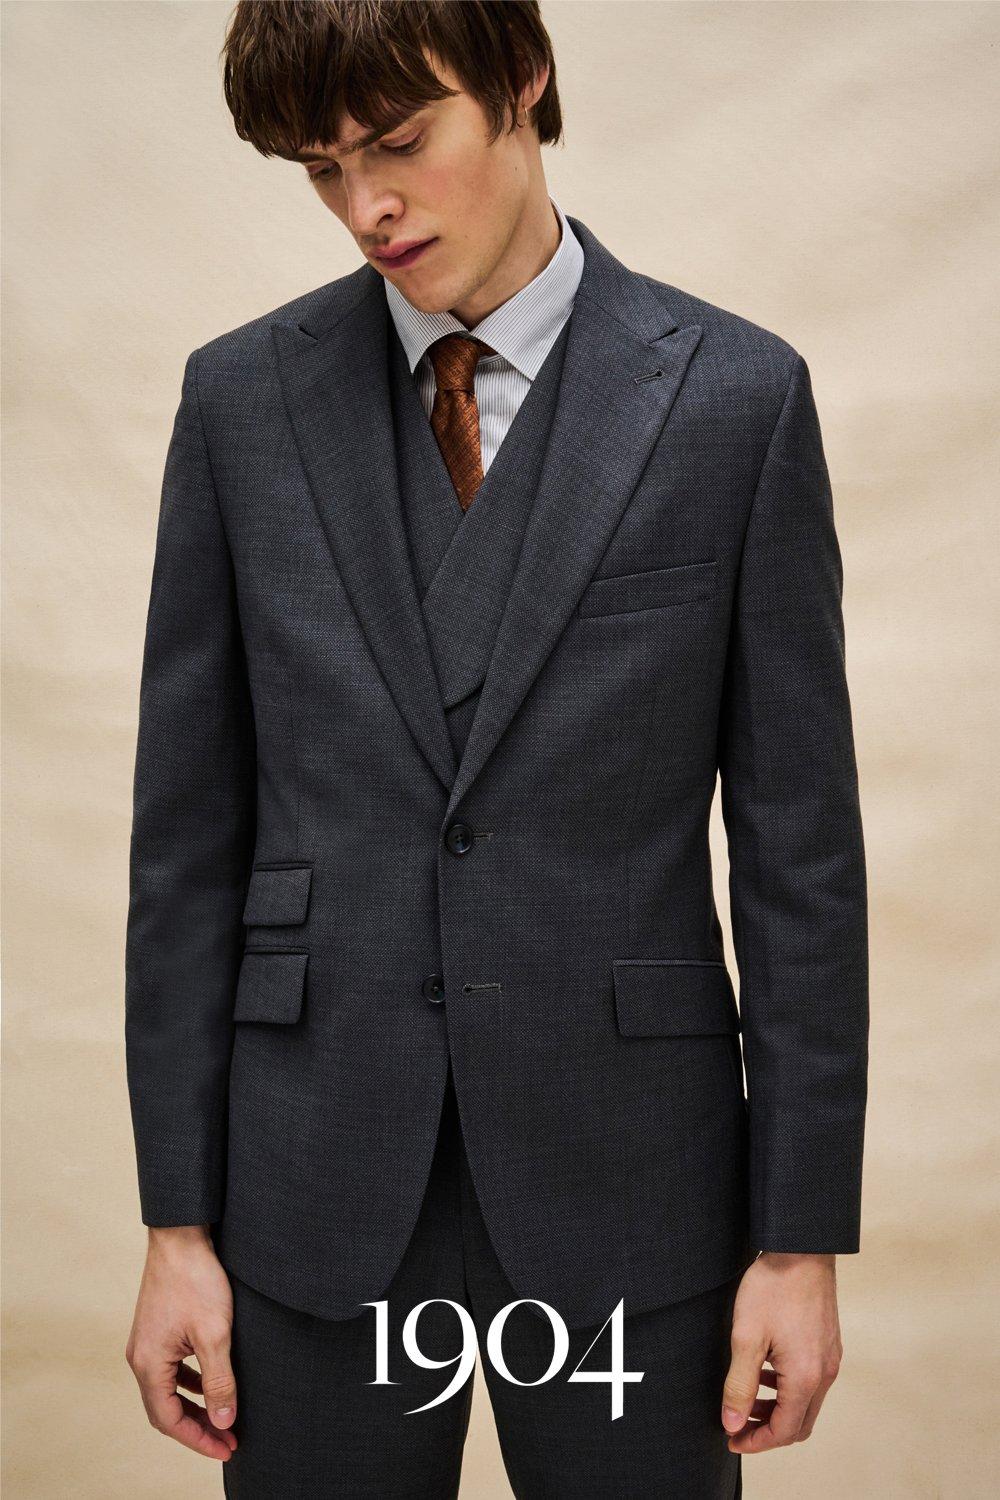 Mens 1904 Tailored Fit Grey Pindot Wool Jacket product